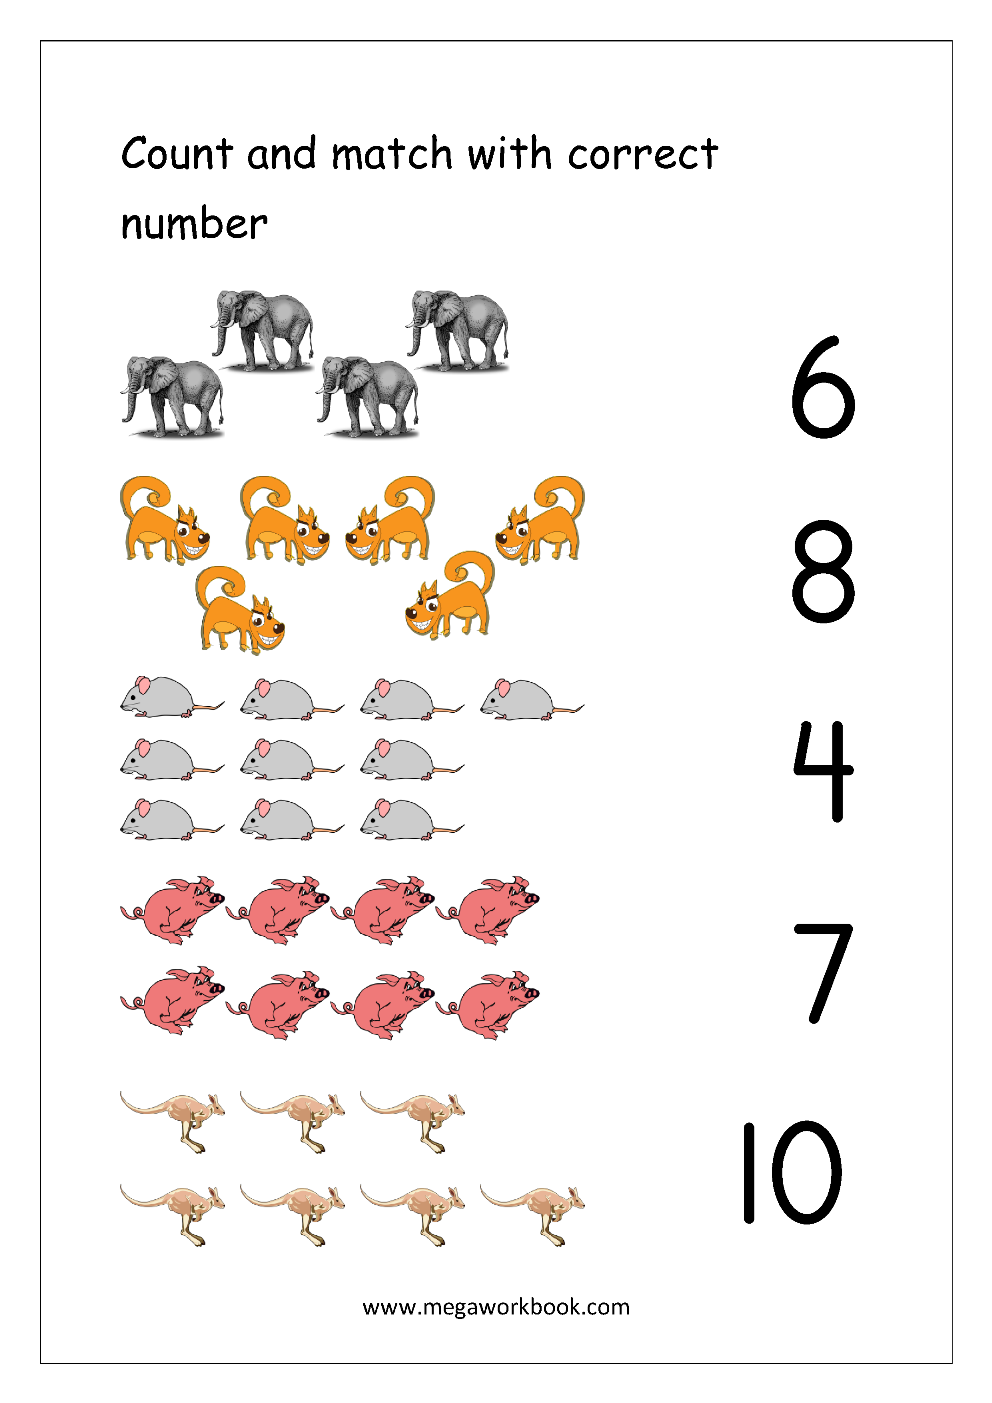 Number1 3 number2 33 word поросенка. Count and Match 1-10. Numbers 1-10 matching. Counting numbers для детей. Count and Match numbers Worksheet for Kindergarten.